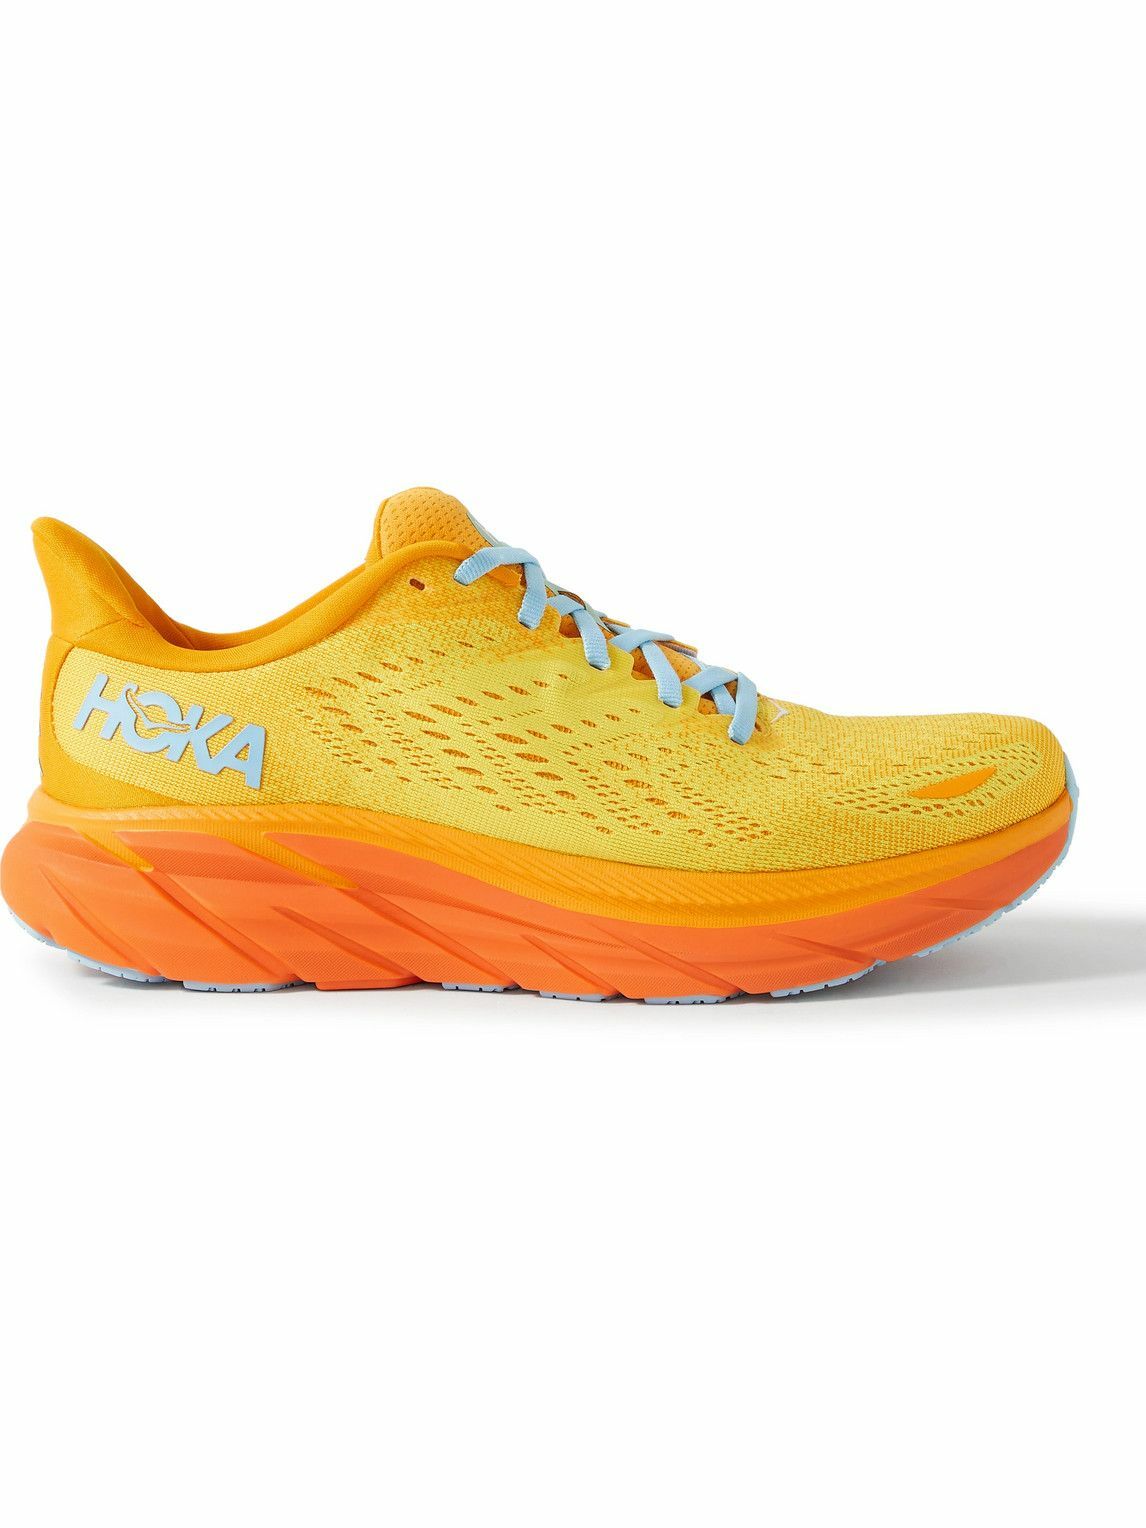 Hoka One One - Clifton 8 Rubber-Trimmed Mesh Running Sneakers - Orange ...